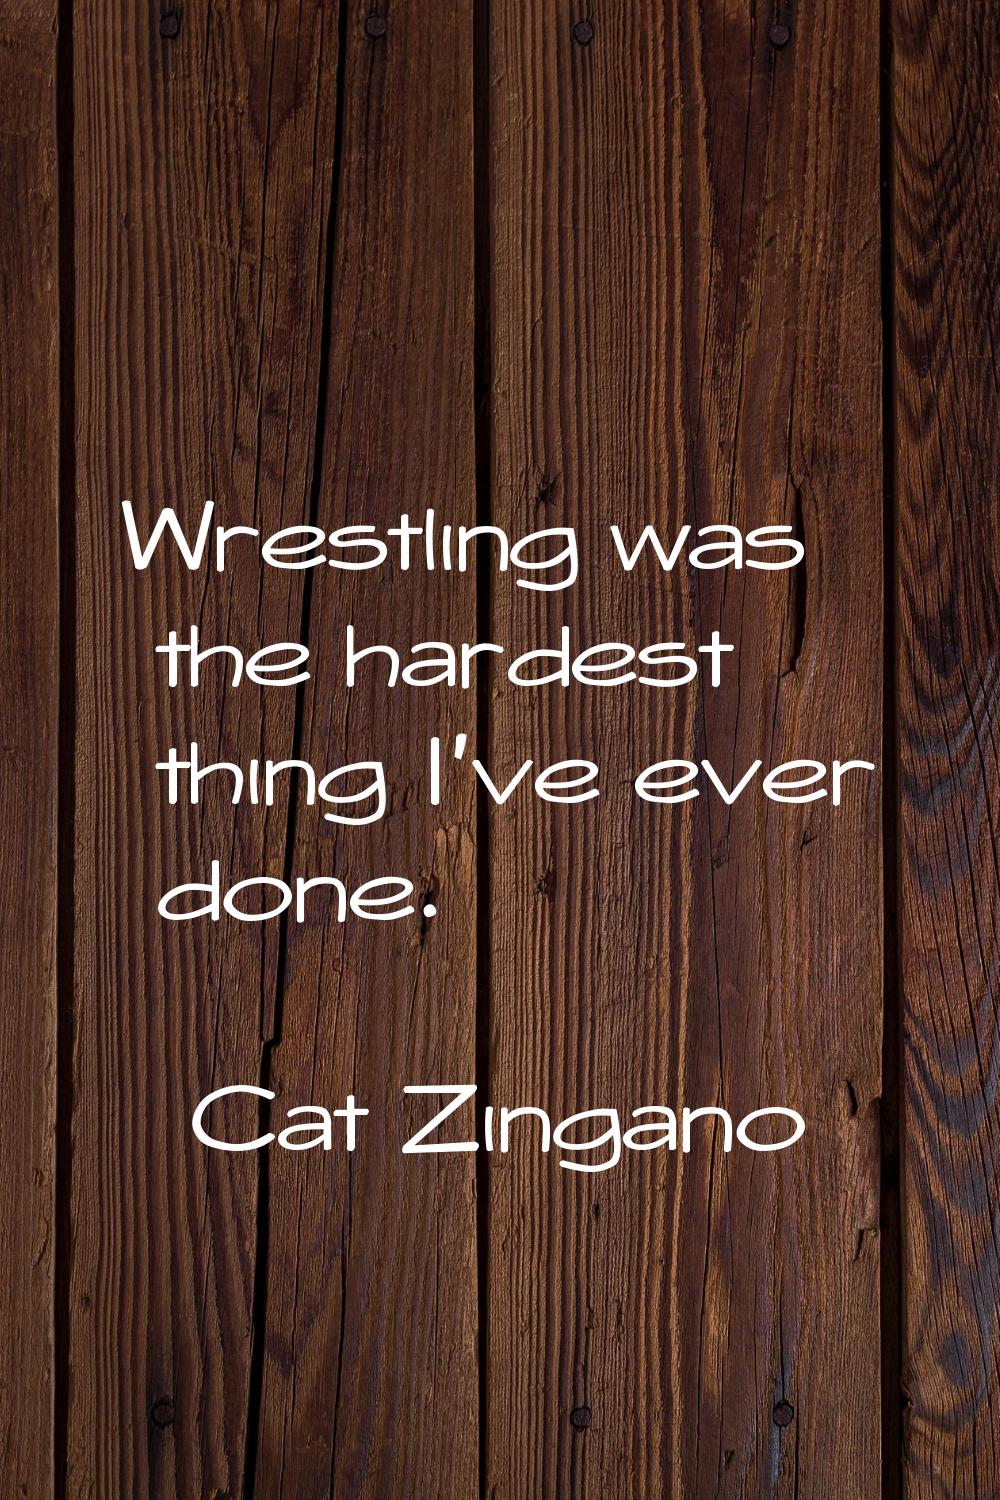 Wrestling was the hardest thing I've ever done.